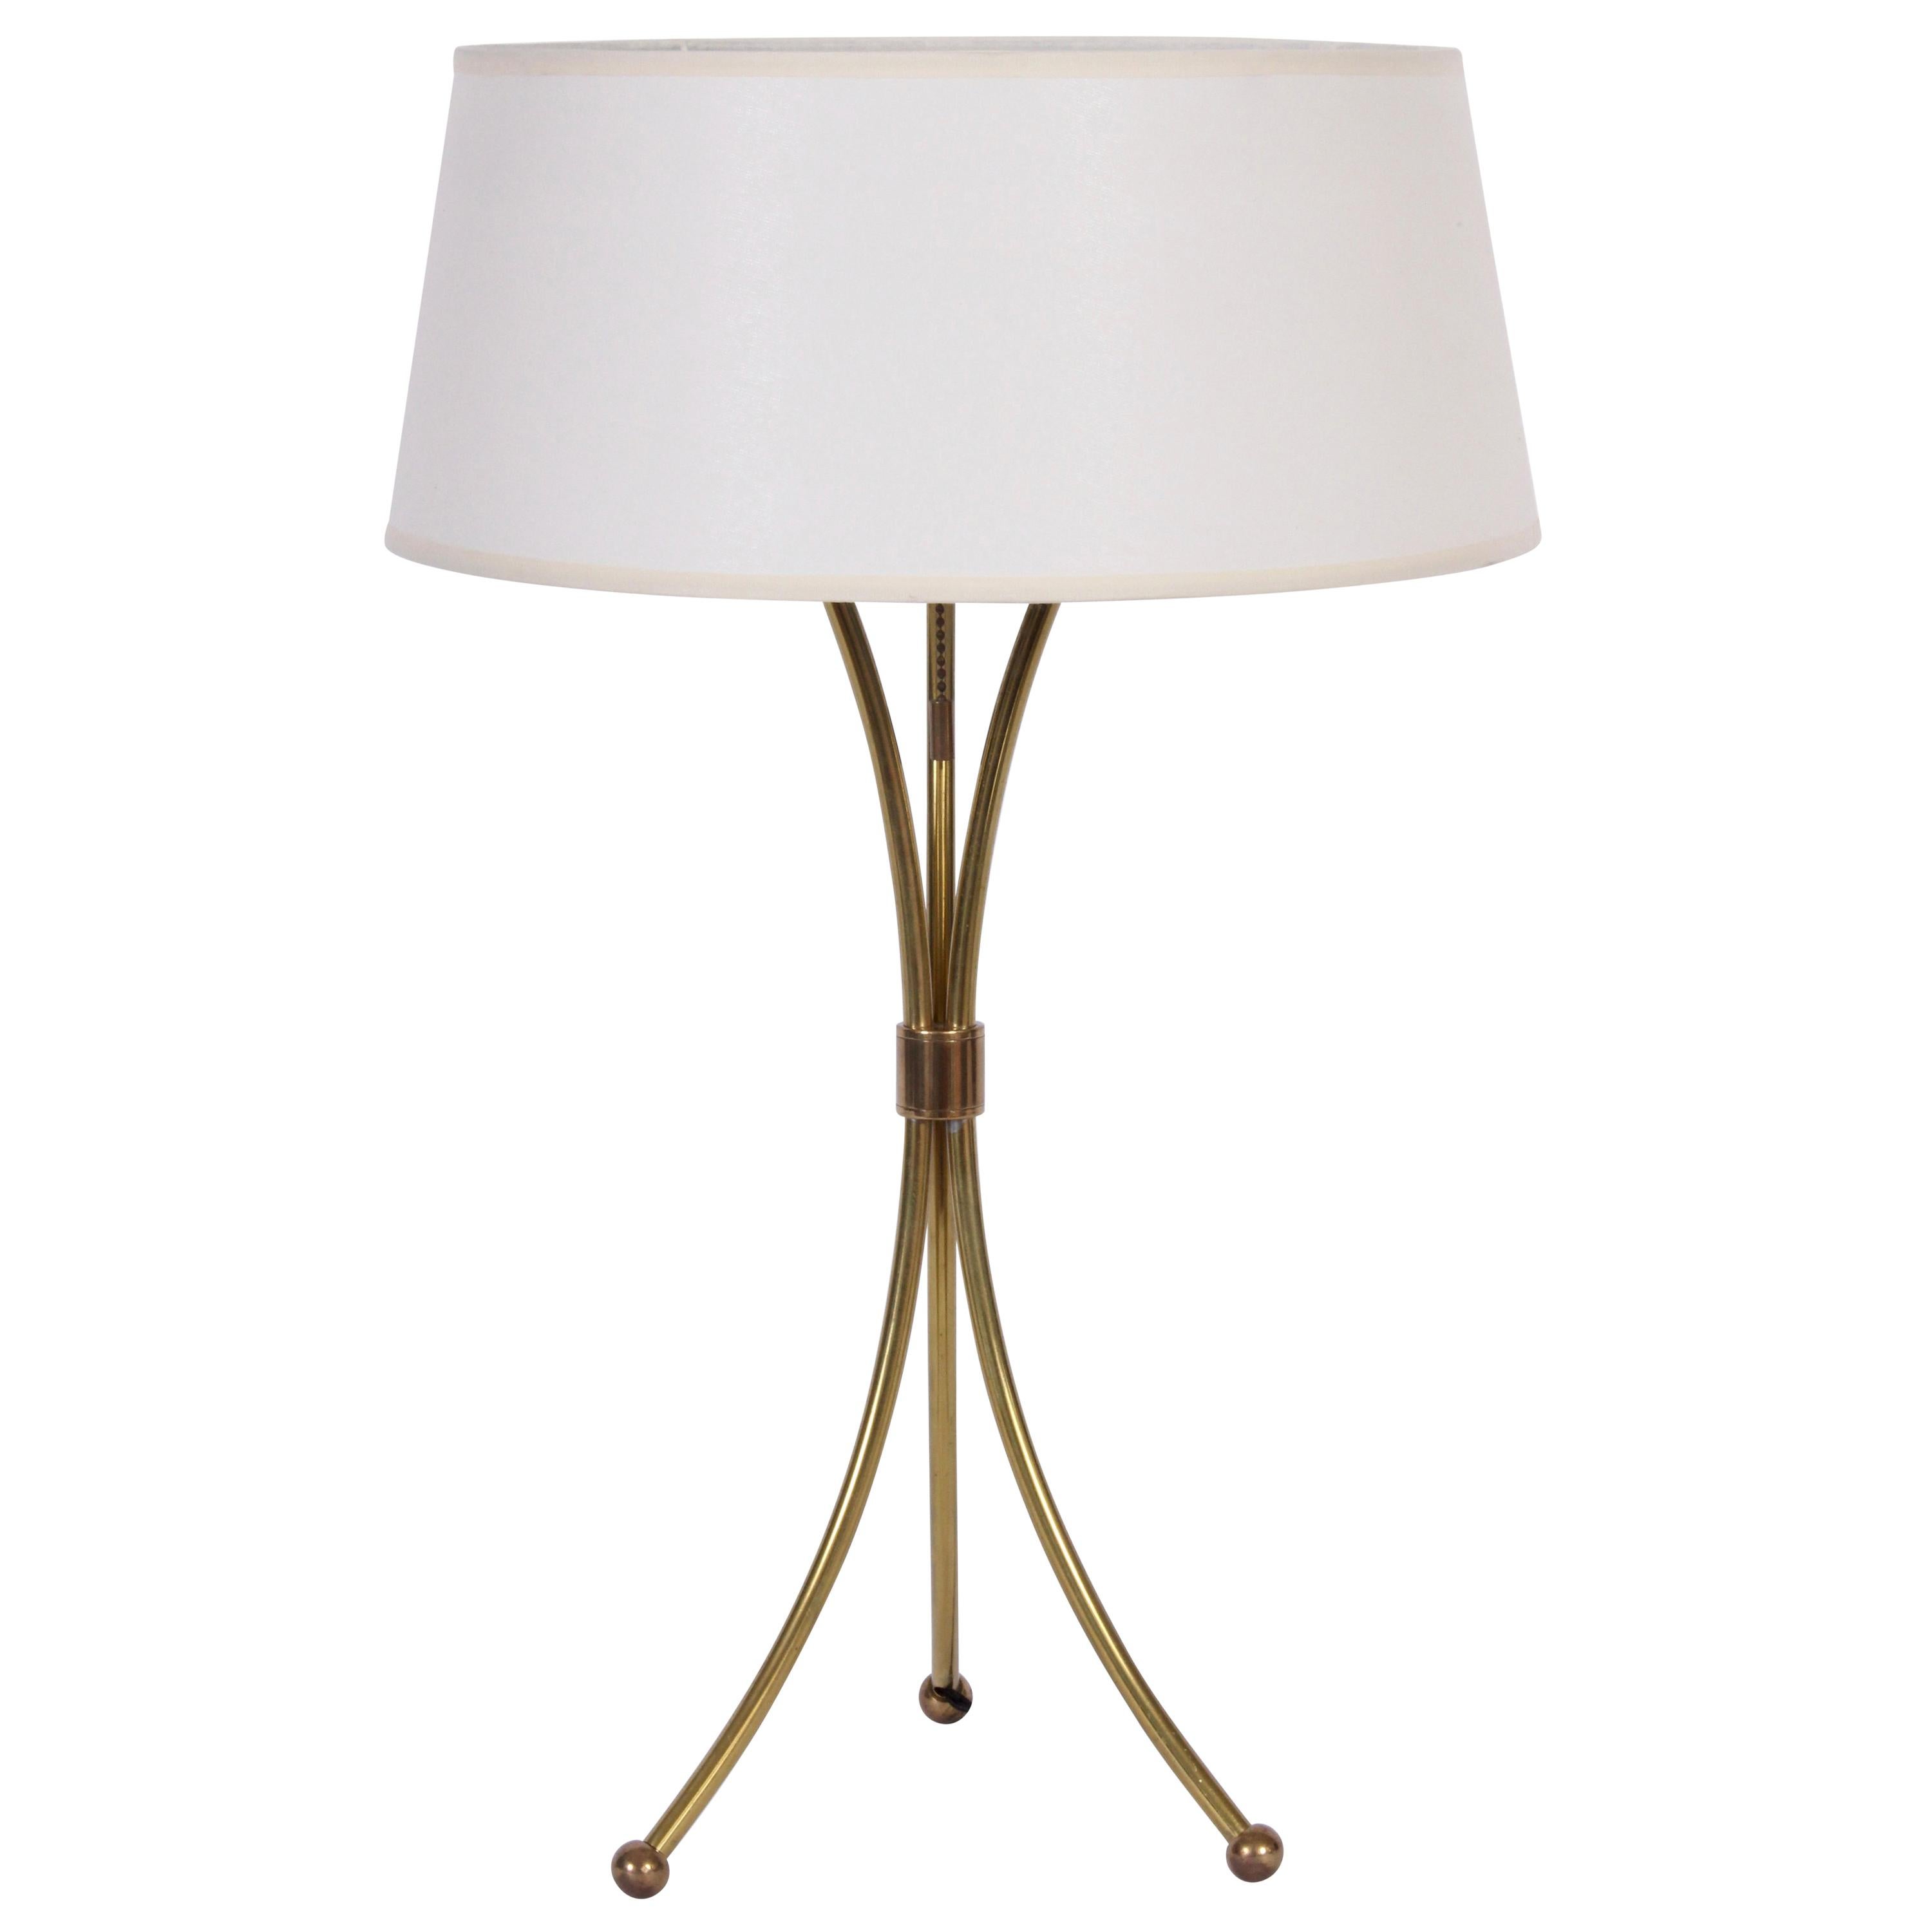 Gerald Thurston Curved Brass Tripod Table Lamp with White Shade, circa 1950